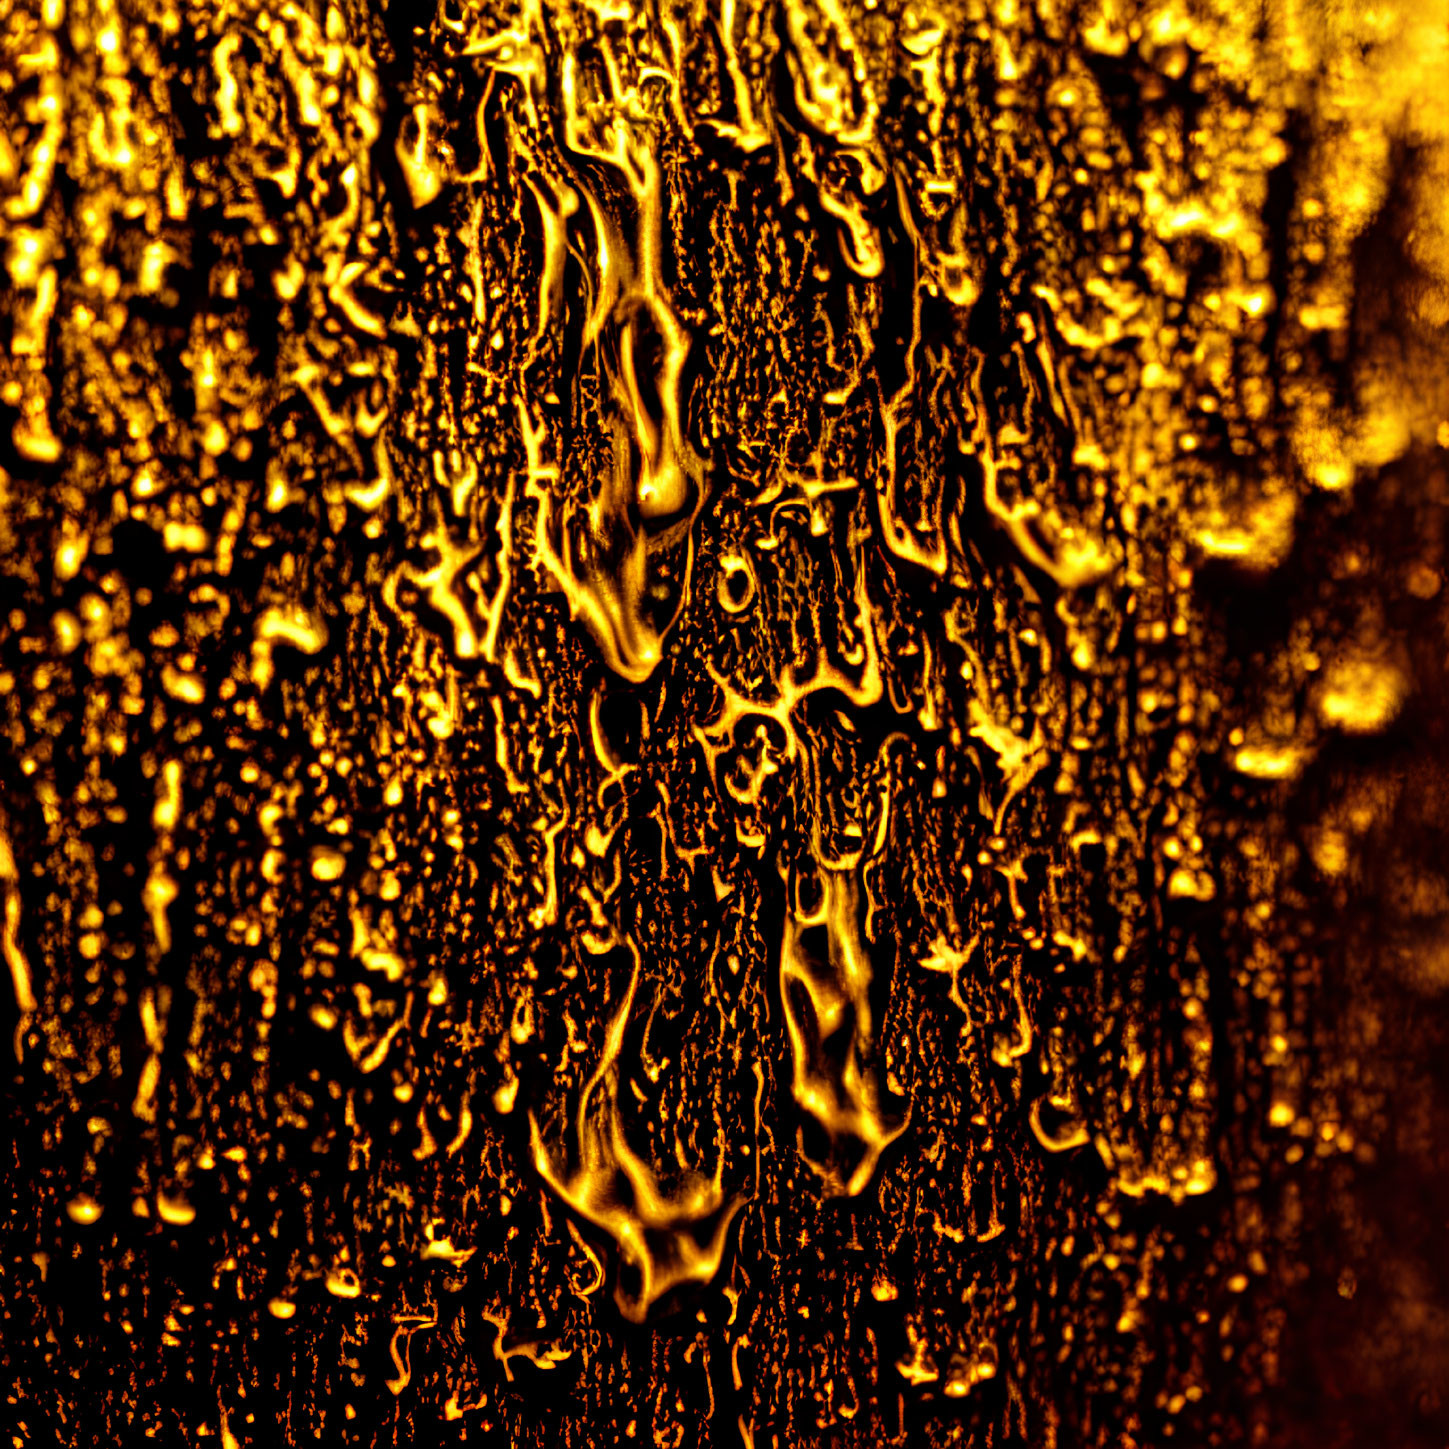 Abstract Golden Droplets Creating Intricate Patterns